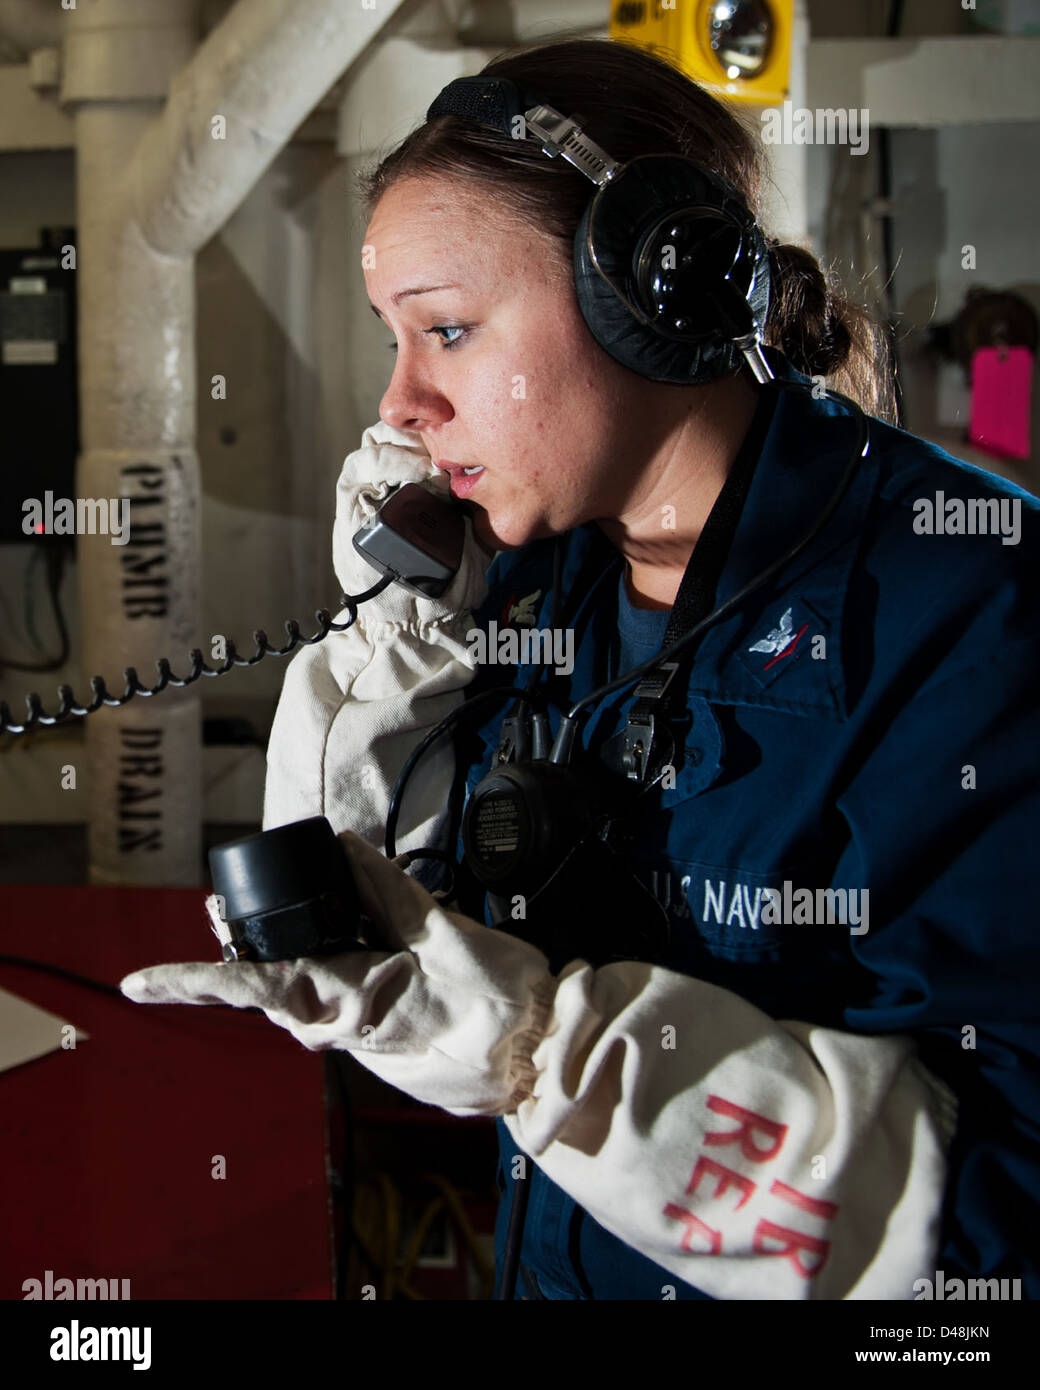 A Sailor relays messages during a fire drill at sea. Stock Photo